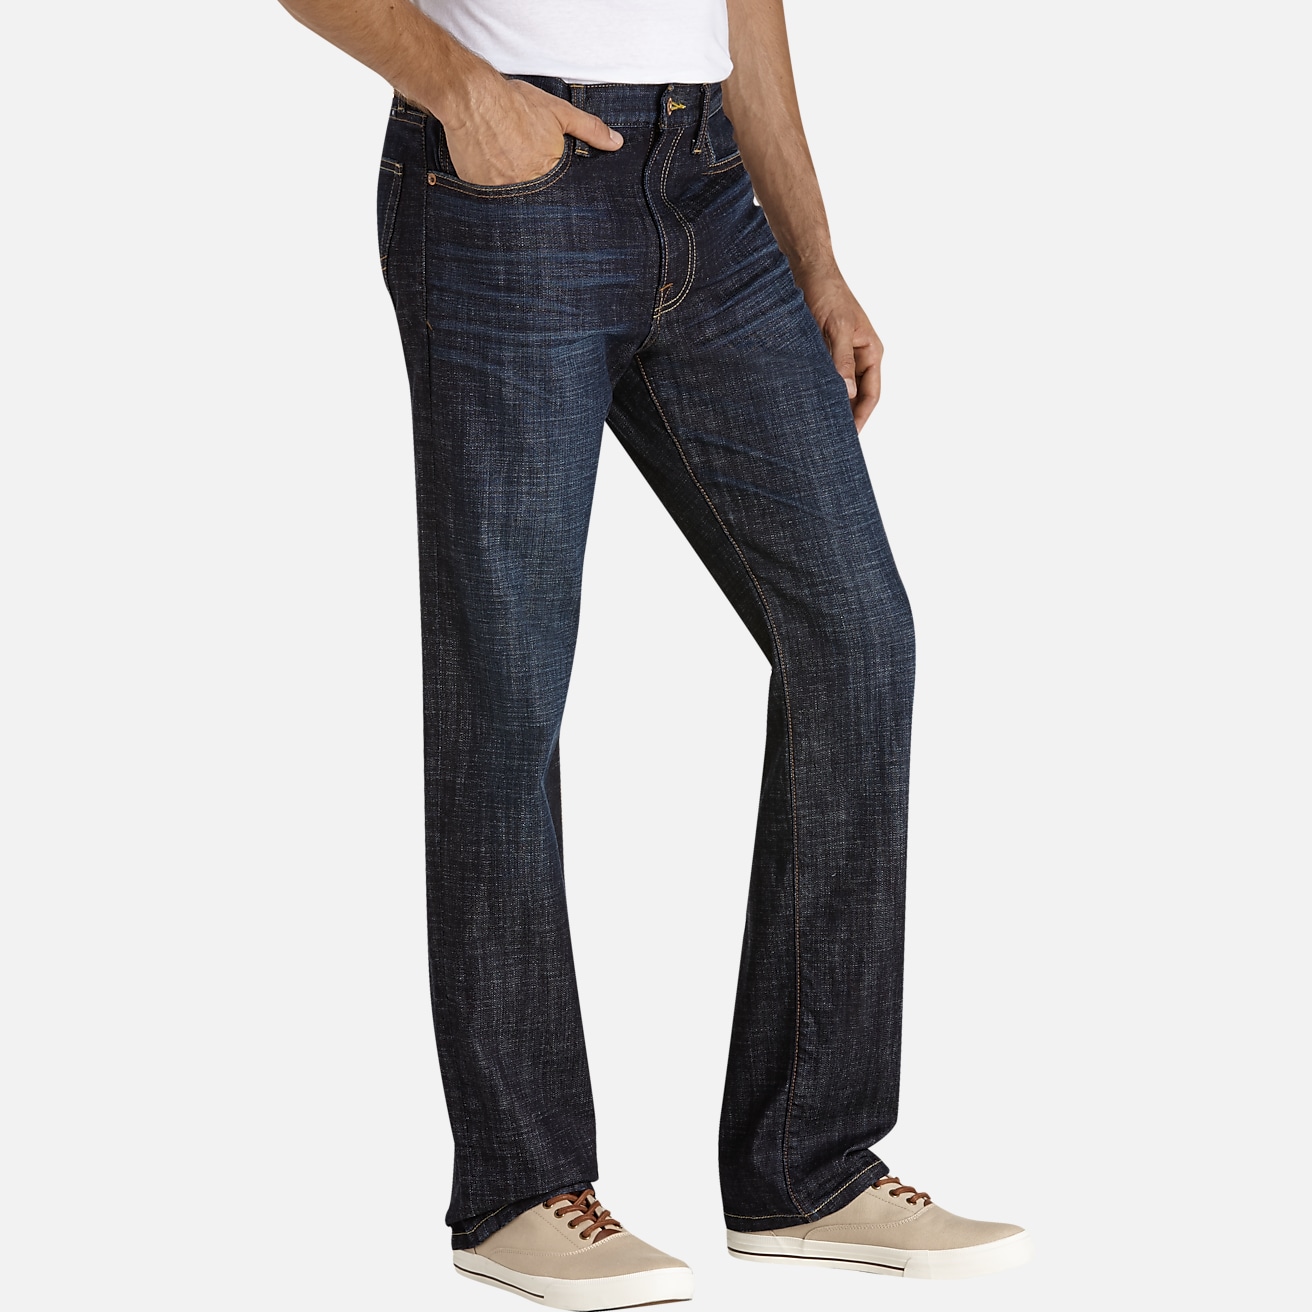 https://image.menswearhouse.com/is/image/TMW/TMW_224X_53_LUCKY_BRAND_JEANS_DARK_WASH_MAIN?imPolicy=pdp-mob-2x